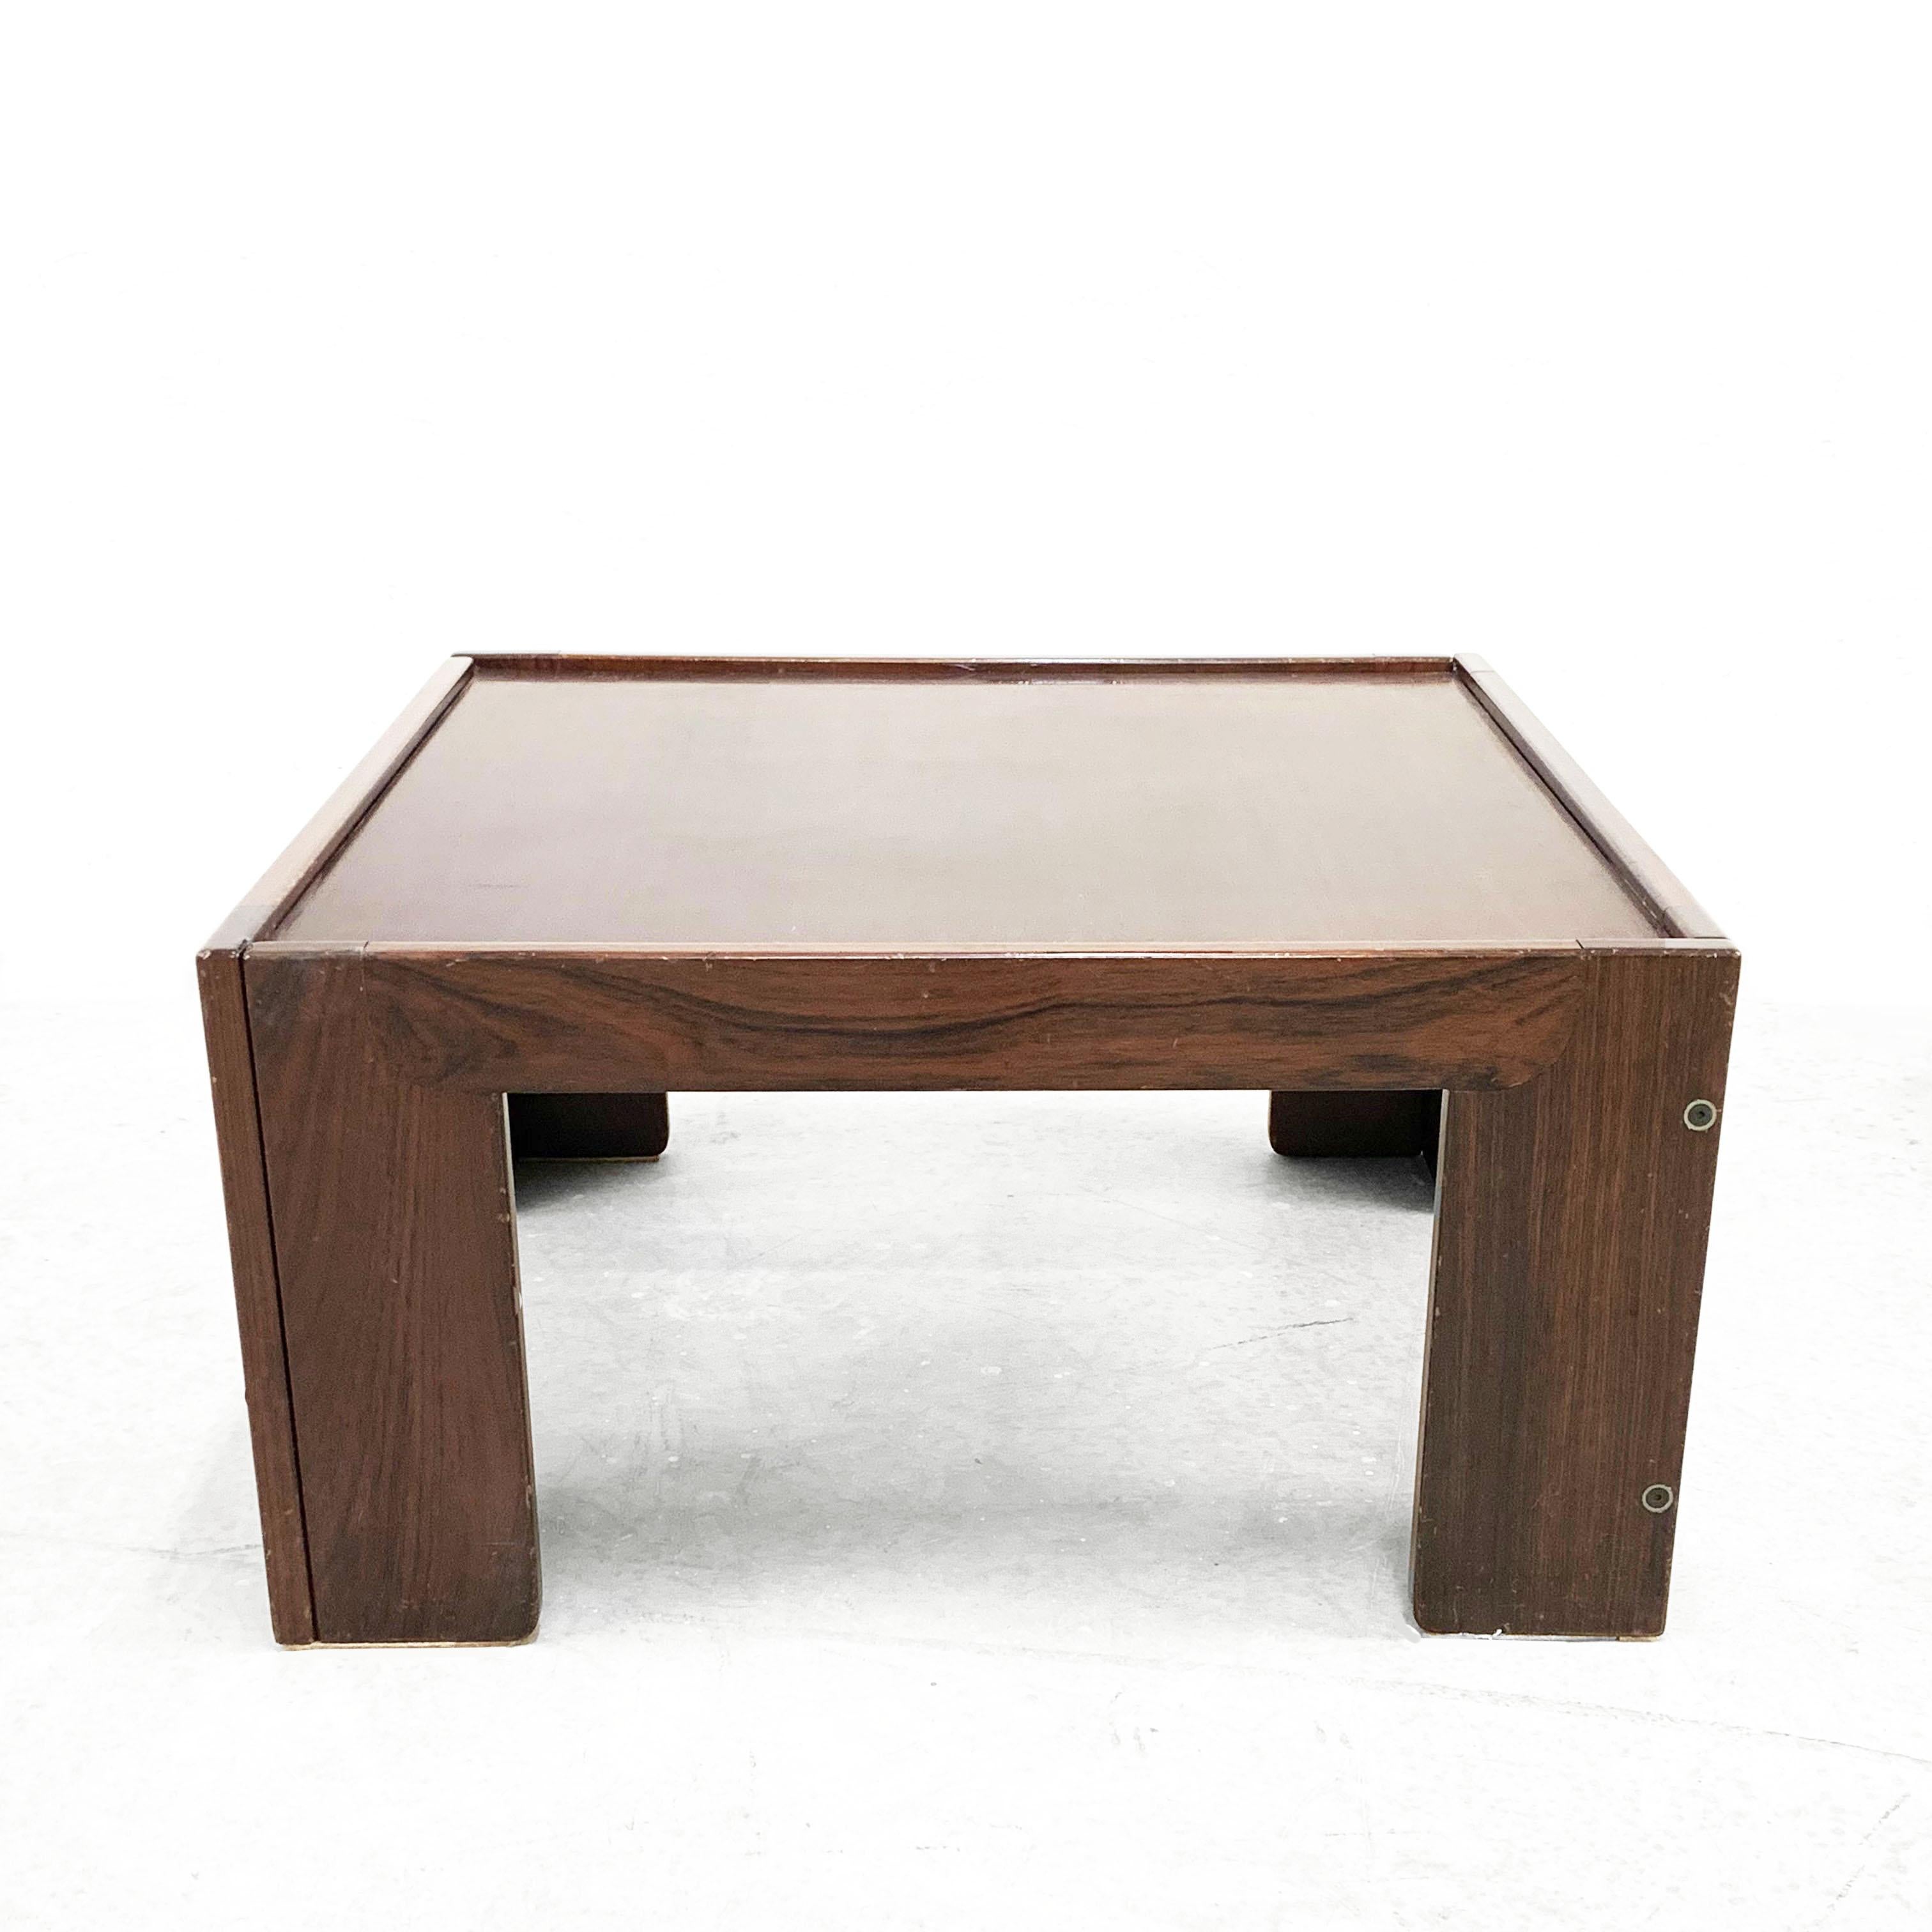 Mid-20th Century Midcentury Afra and Tobia Scarpa Wood Italian Squared Table for Cassina 1965 For Sale